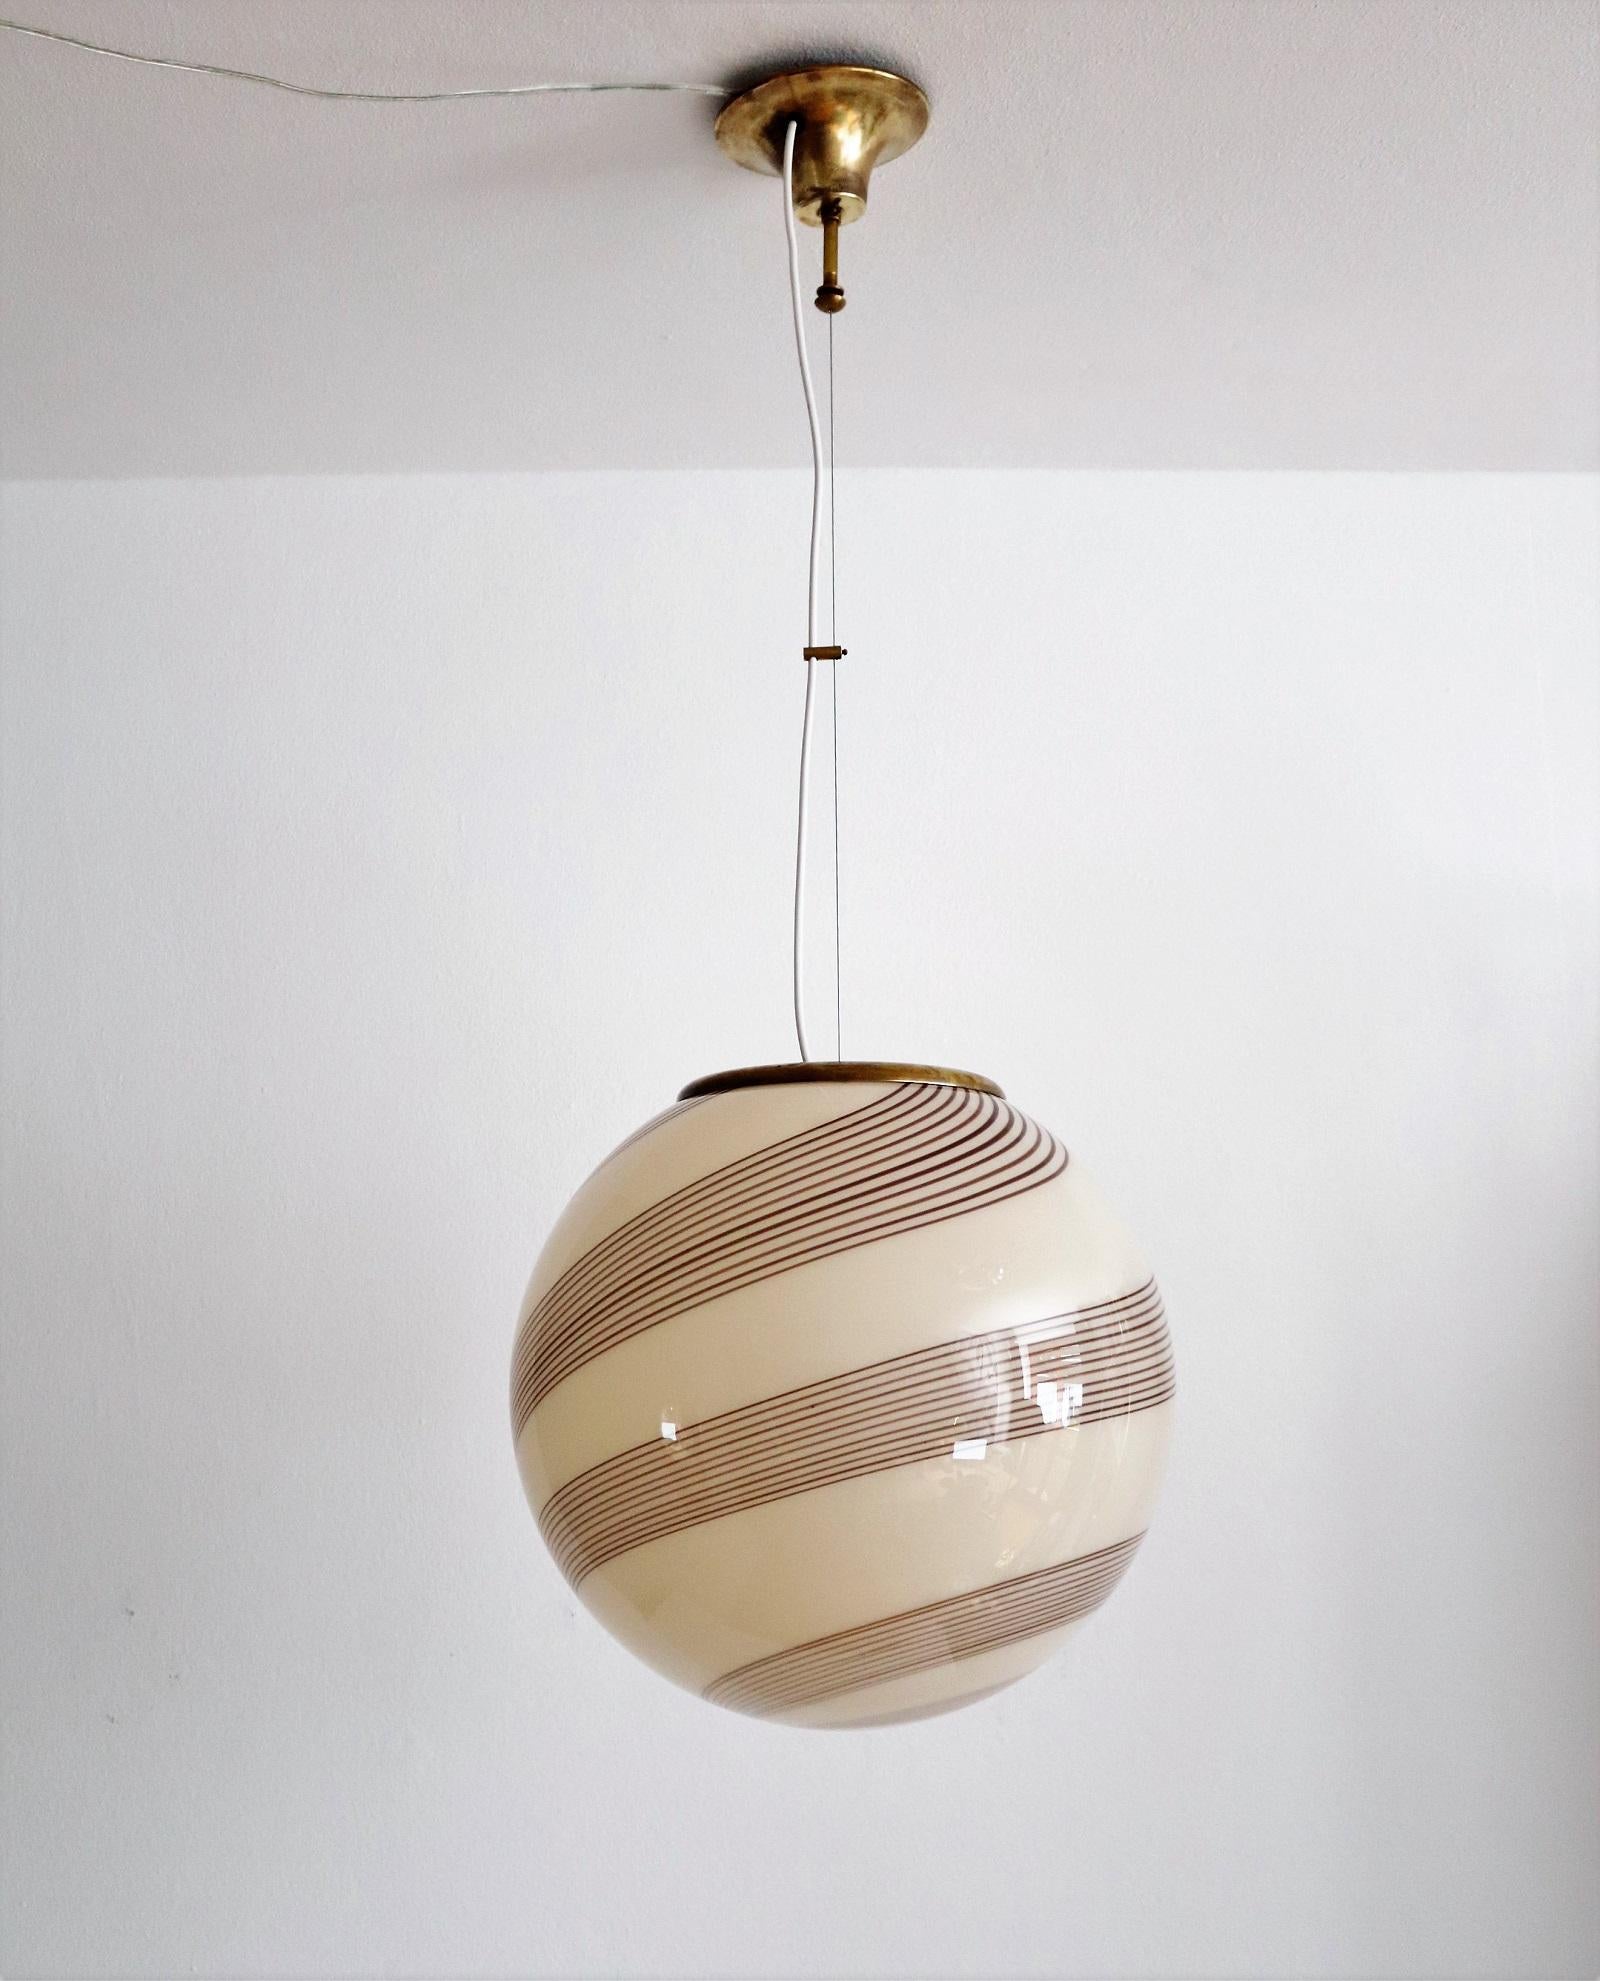 Beautiful and elegant Murano glass globe pendant lamp with brass details.
Made in Italy in the 1960s.
The elegant Murano glass has a soft light yellow-brown /amber color with darker brown stripes and is in original excellent condition without